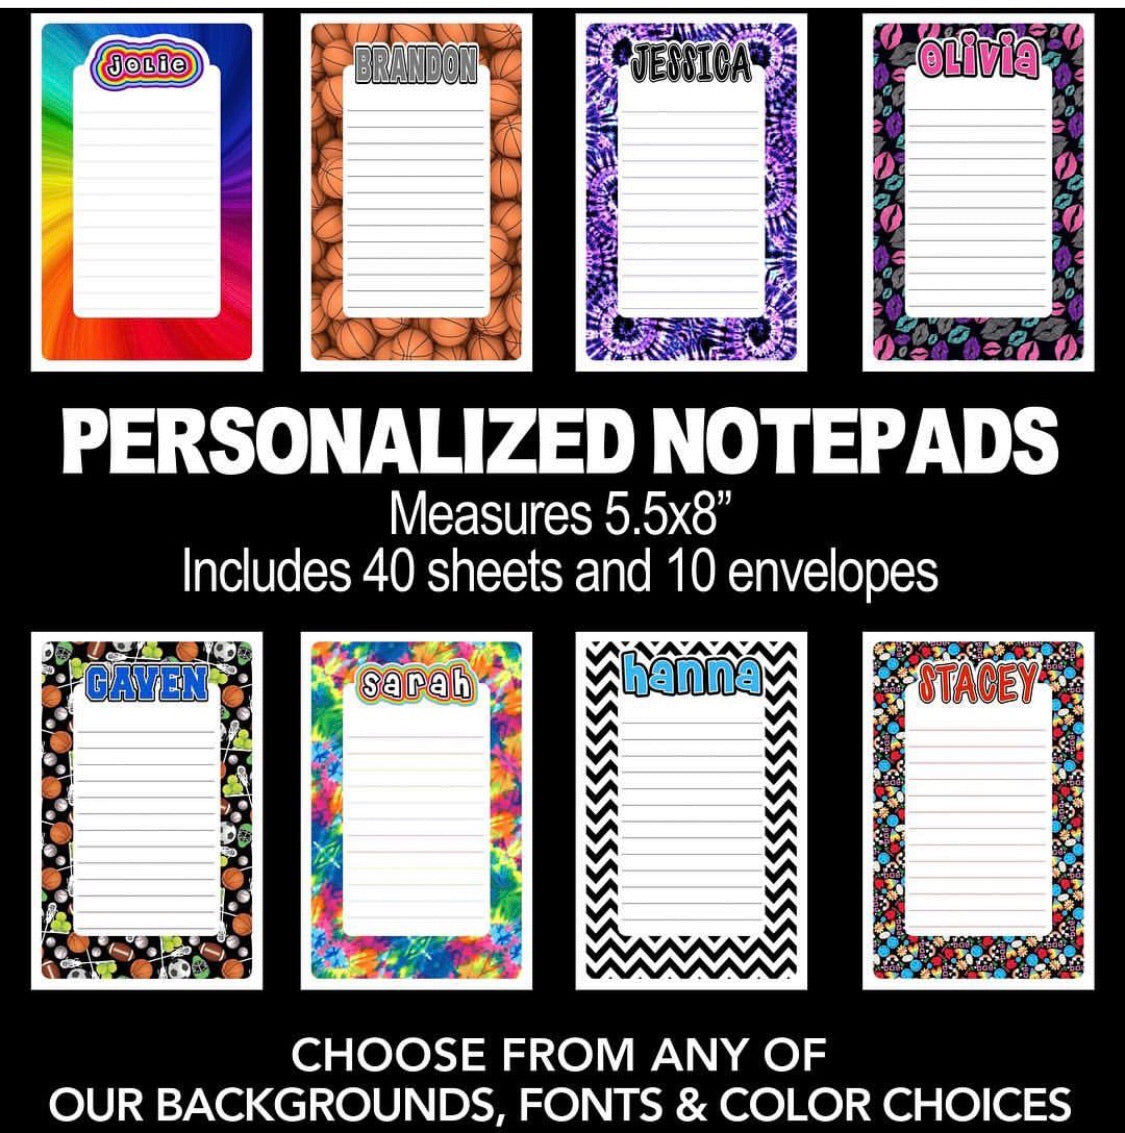 Stationary Notepads Personalized